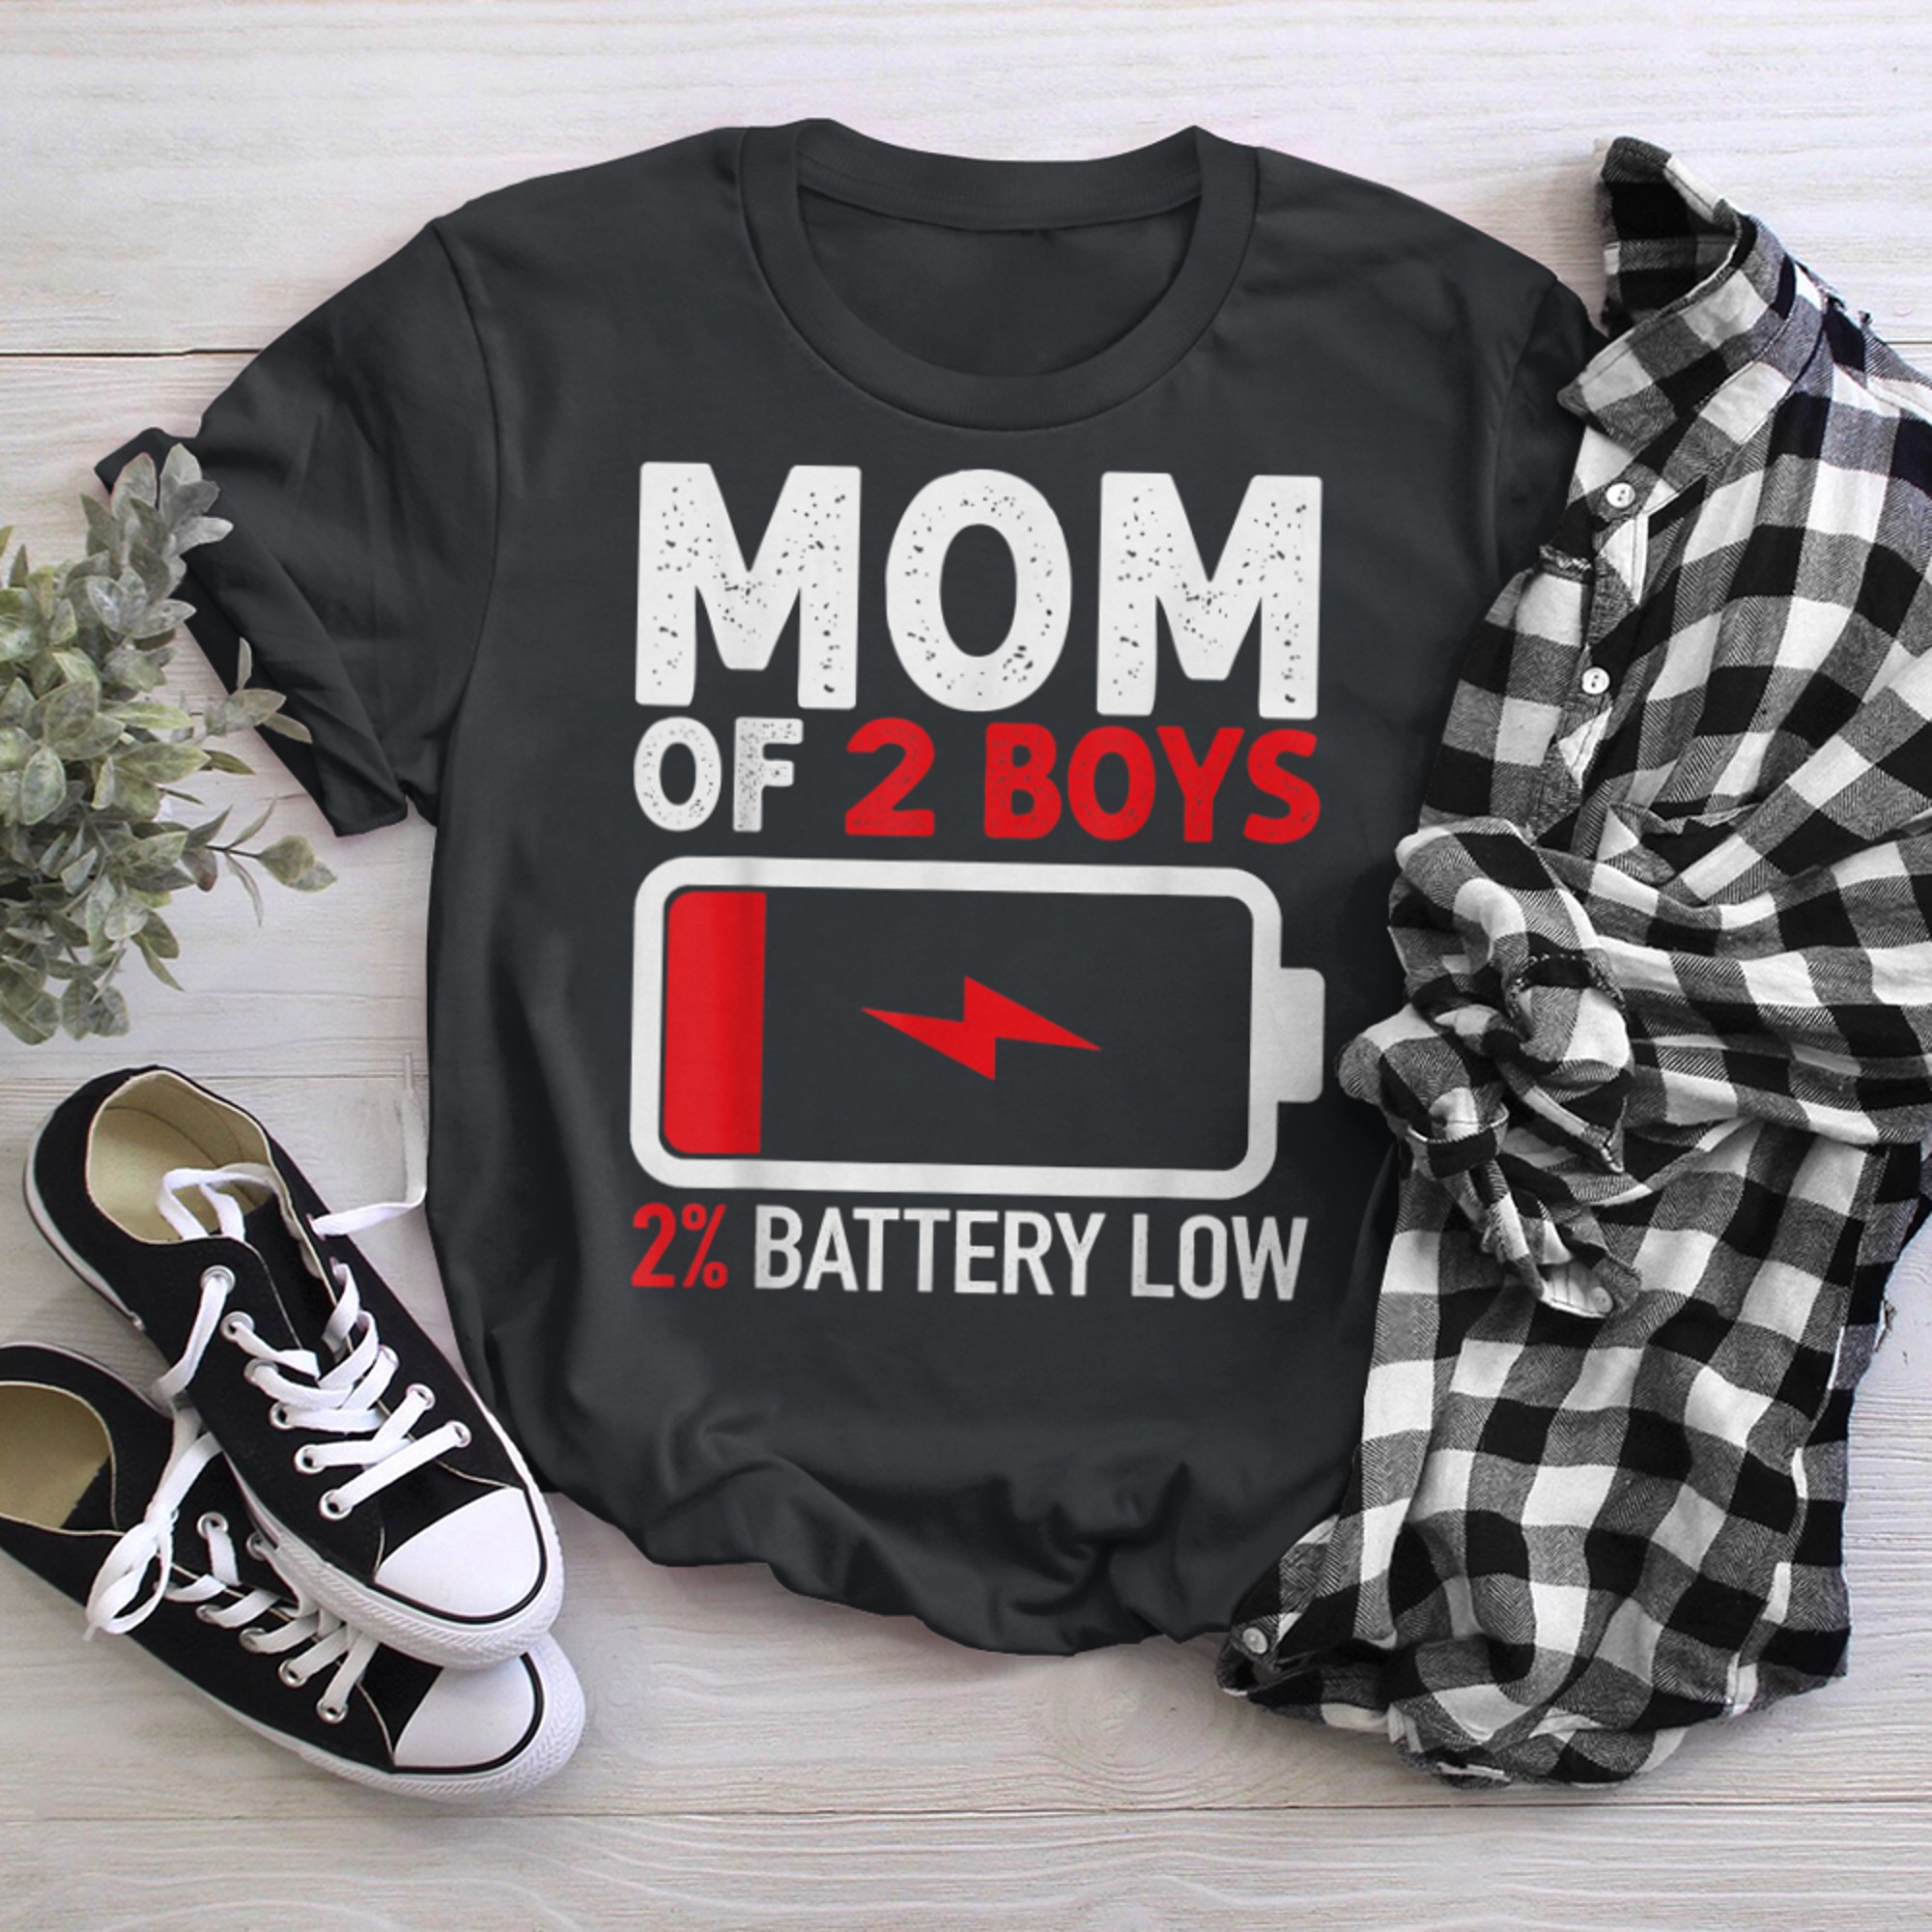 Mom of from Son Mothers Day Birthday (13) t-shirt black